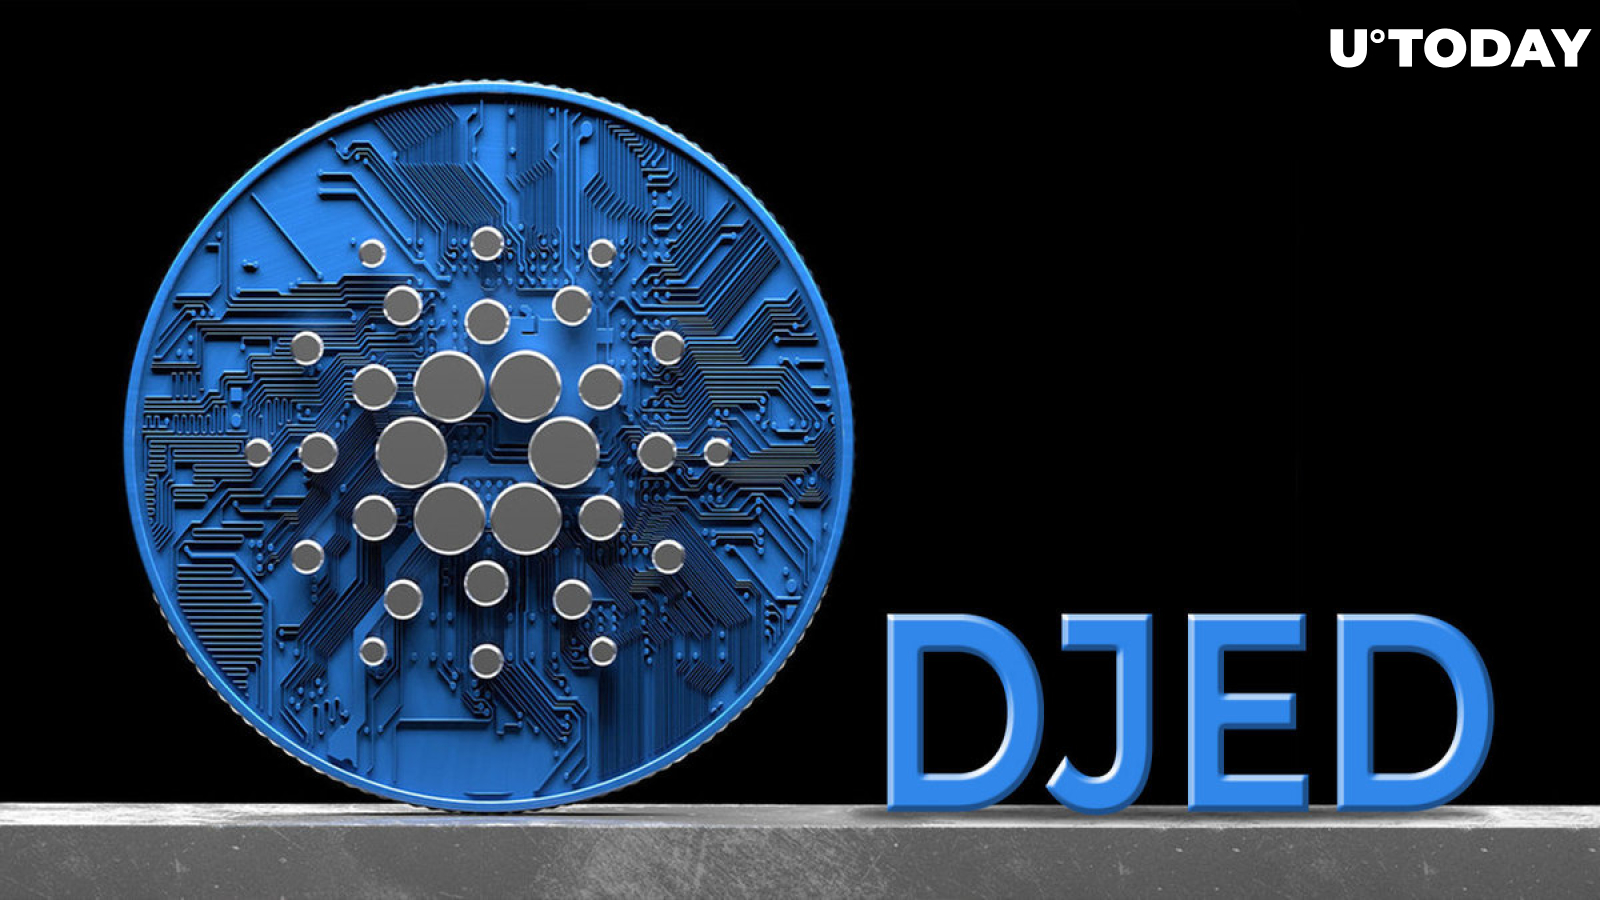 Cardano-Based DJED Stablecoin Now Available for Lending and Borrowing: Details